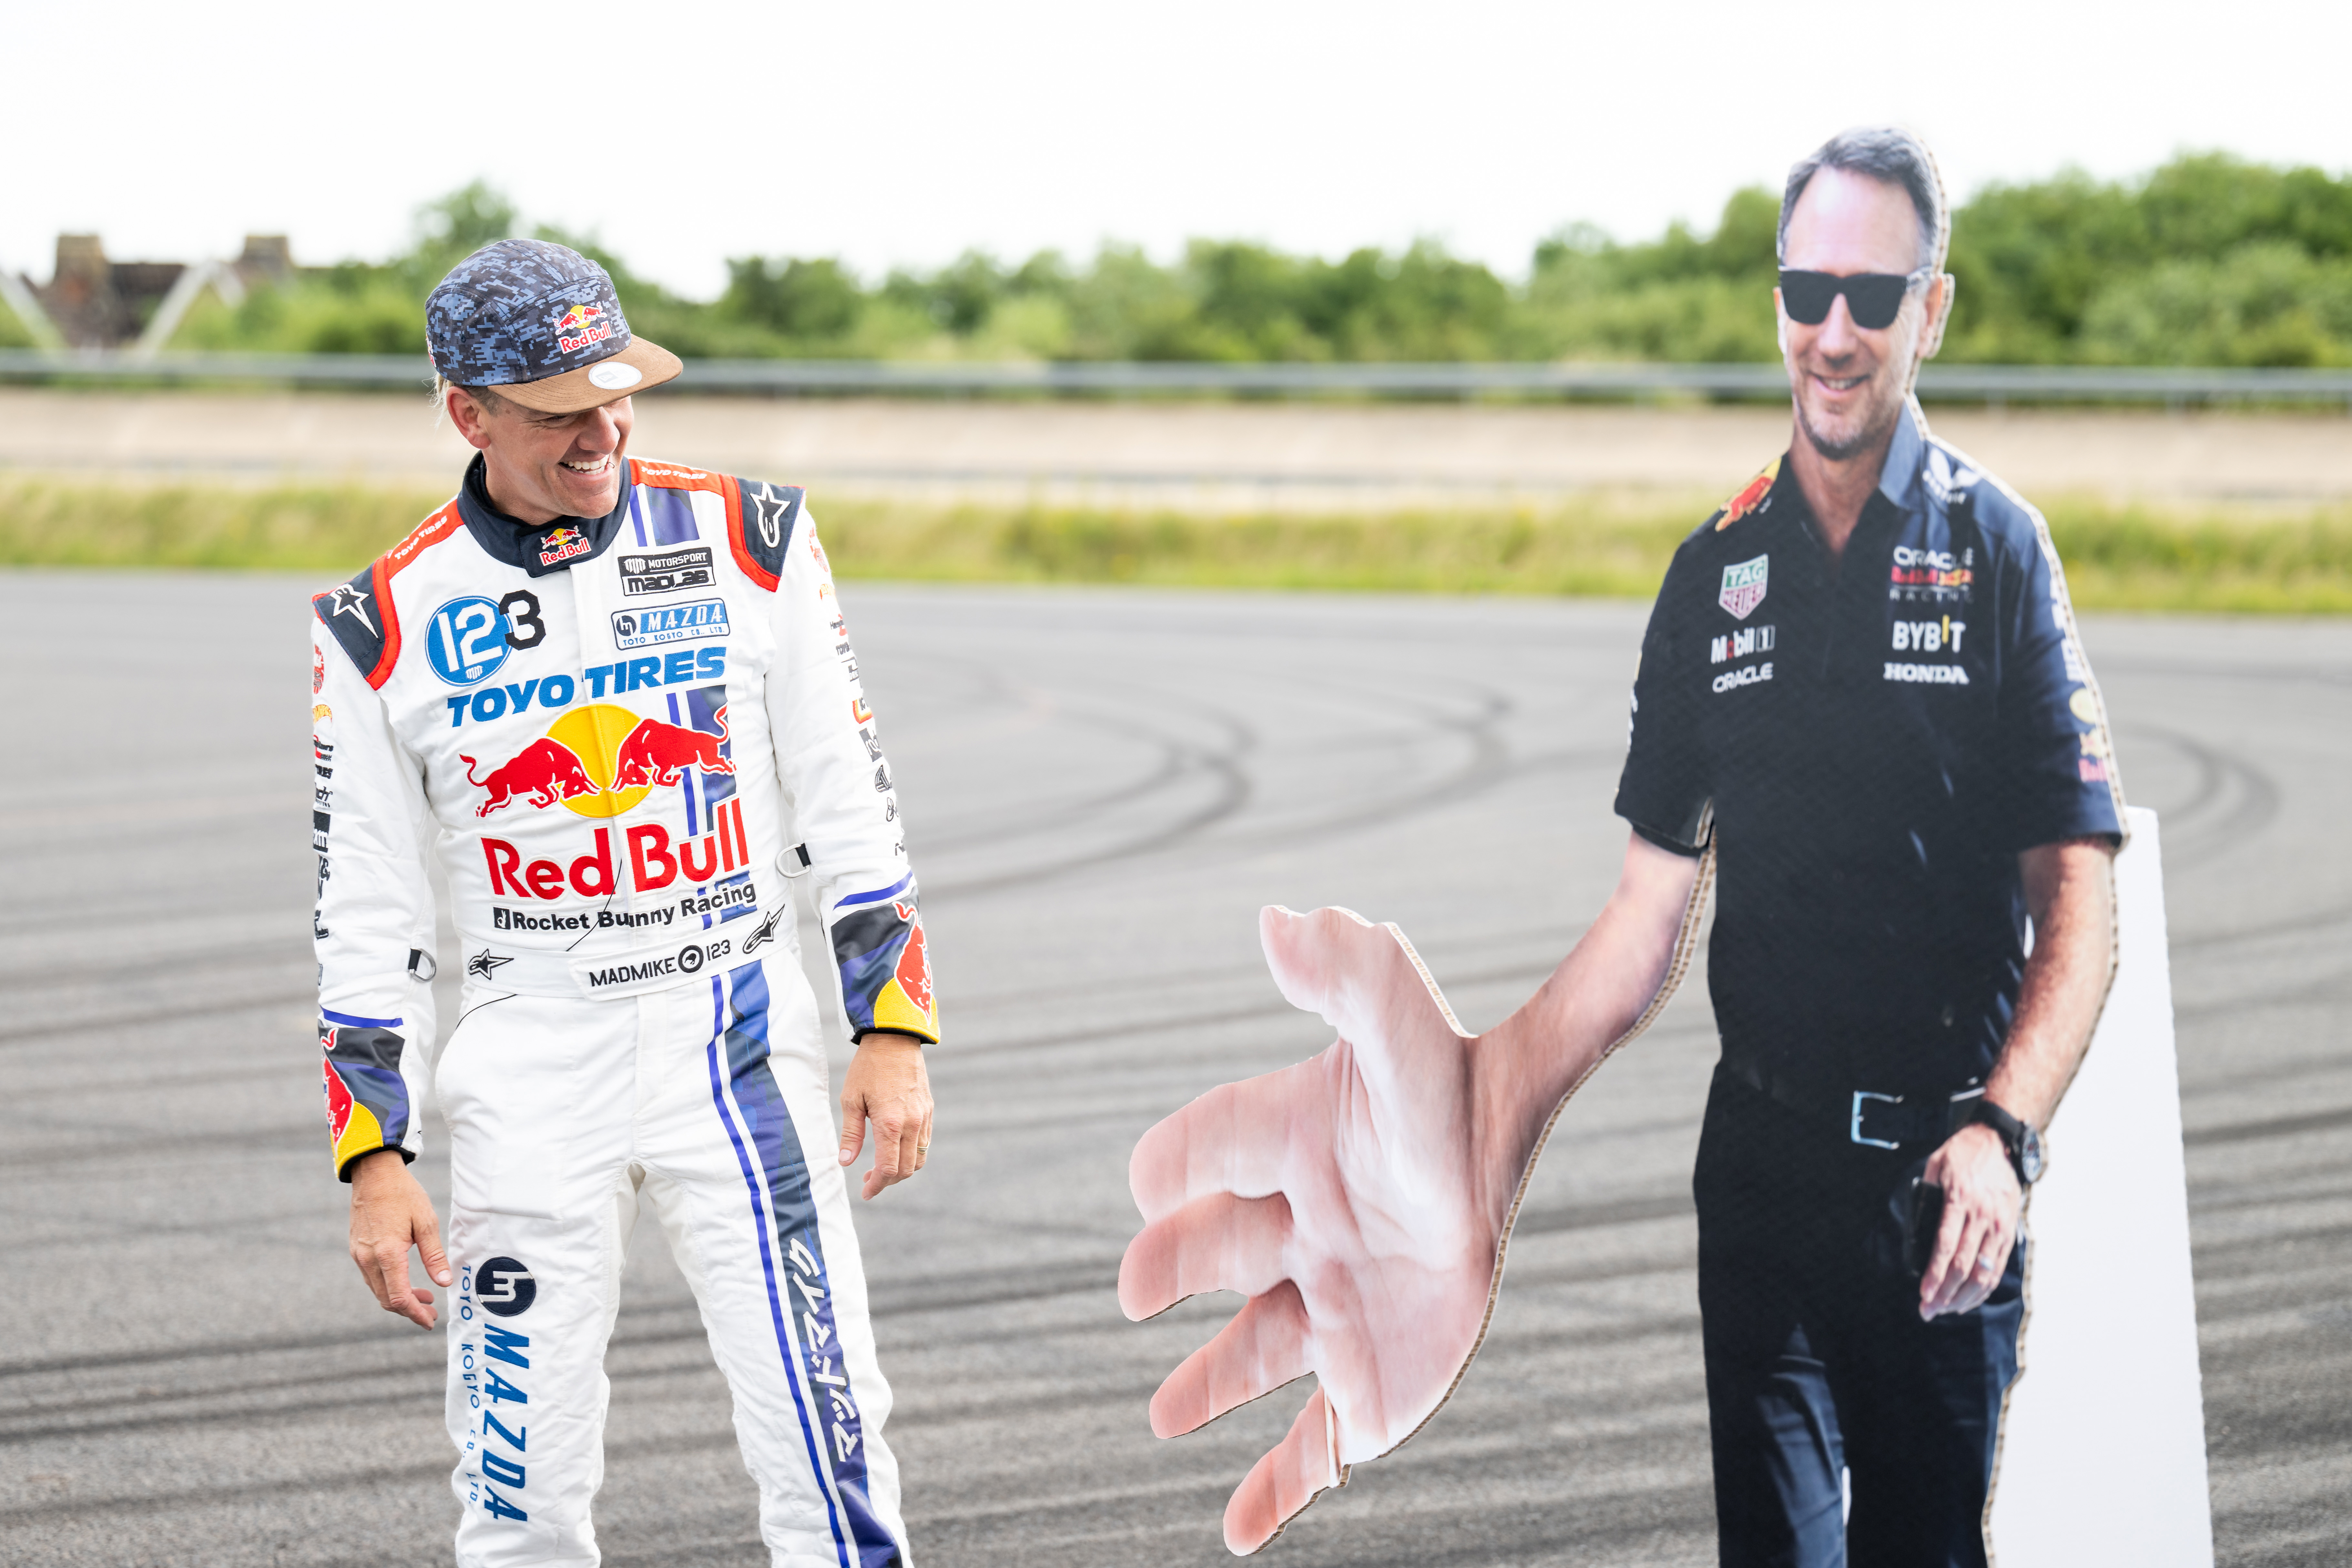 Mike Whiddett stood next to cardboard cutout of man with an oversized hand